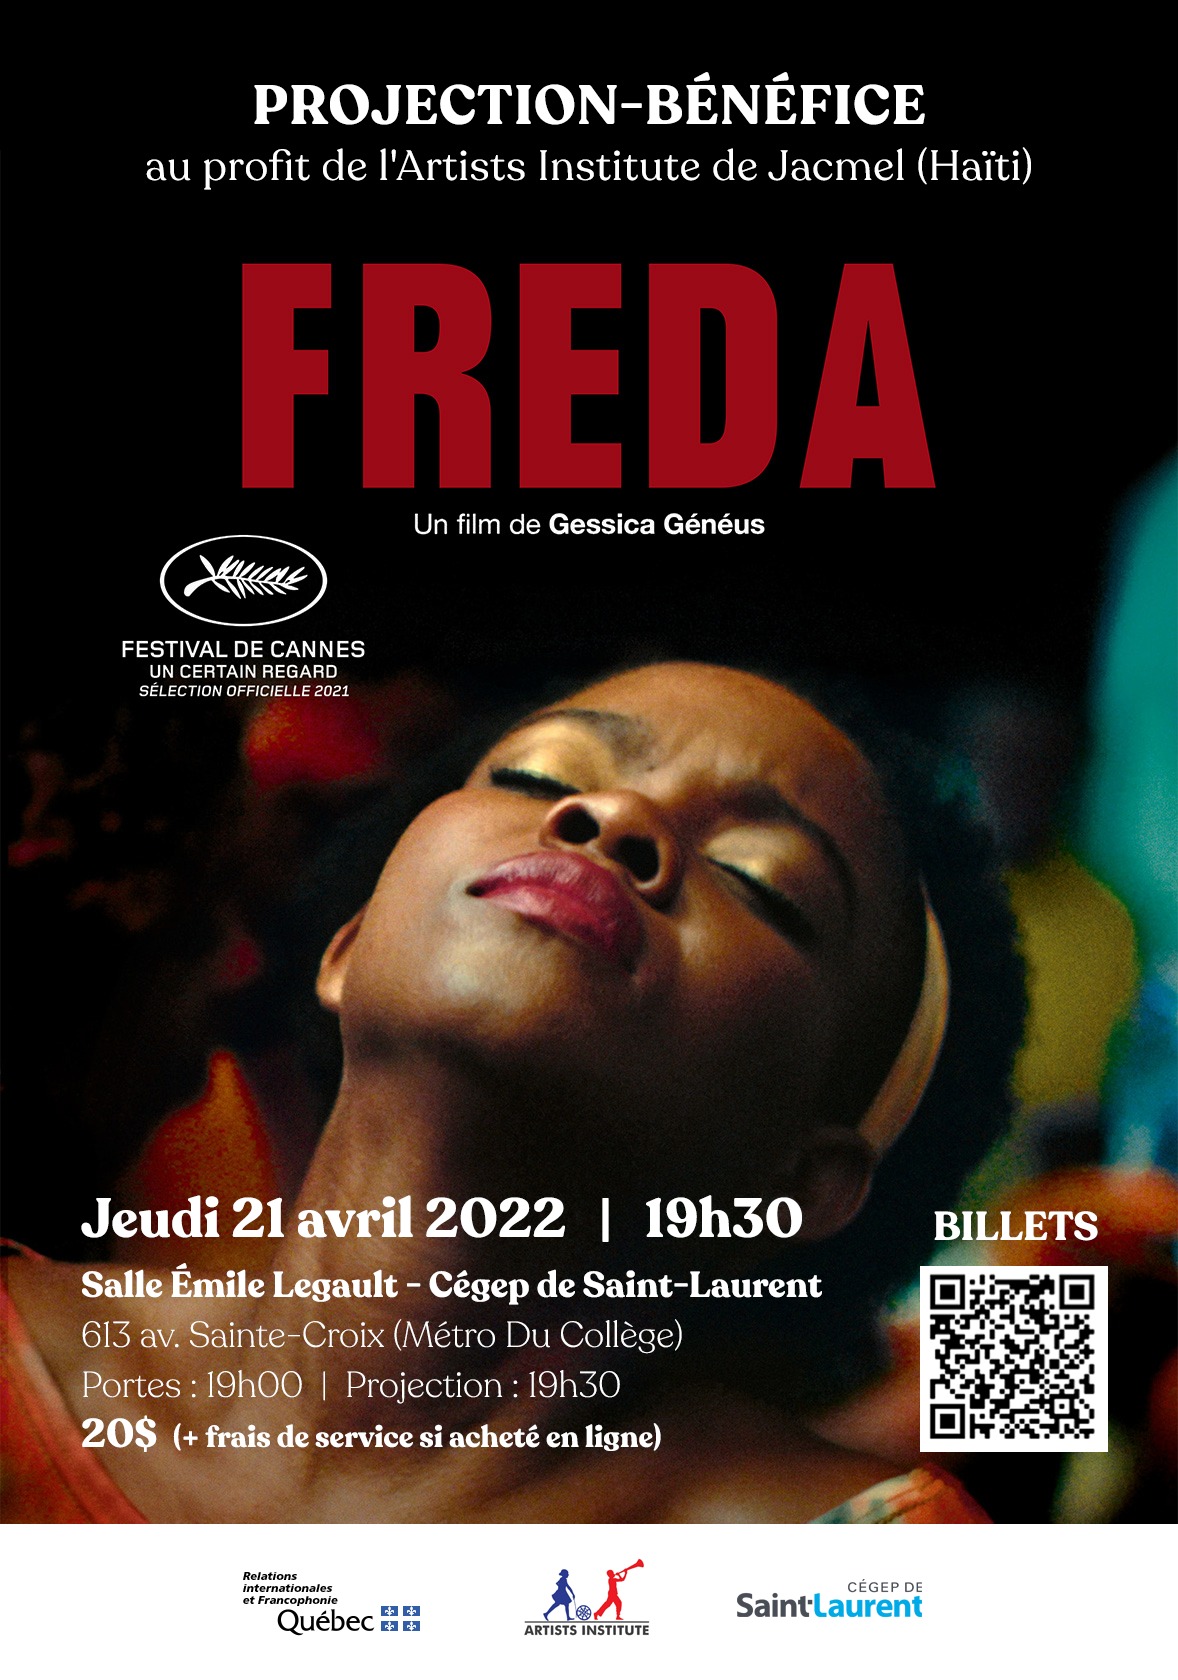 You are currently viewing 21/04/2022 - Projection-bénéfice : FREDA de Gessica Généus